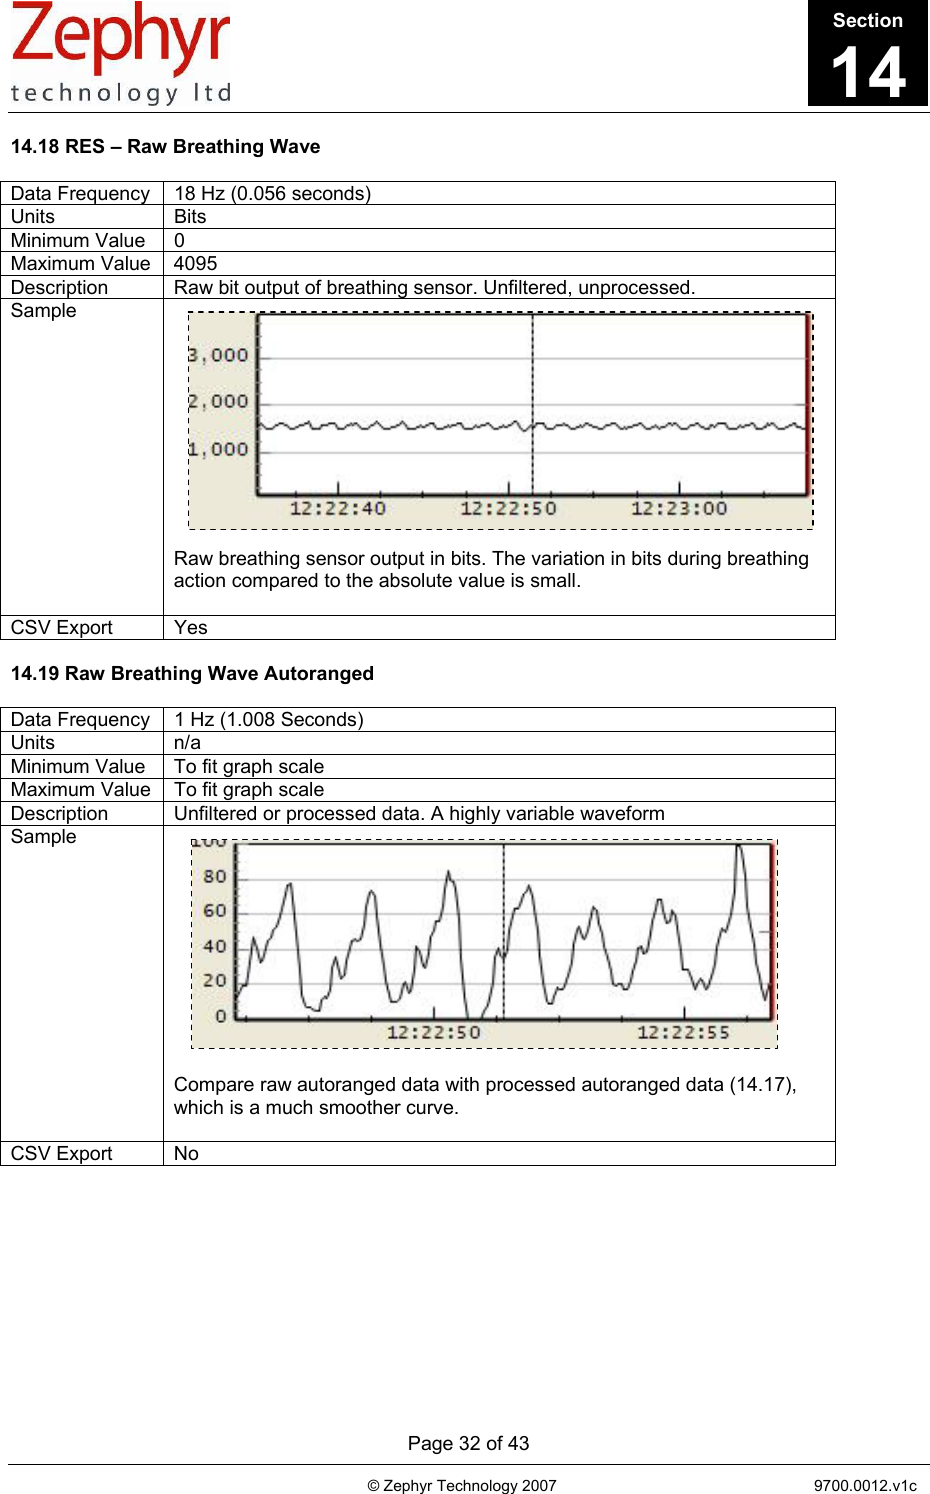       Page 32 of 43                                                                                   © Zephyr Technology 2007                                                           9700.0012.v1c                                         14.18 RES – Raw Breathing Wave  Data Frequency  18 Hz (0.056 seconds) Units Bits Minimum Value  0 Maximum Value  4095 Description  Raw bit output of breathing sensor. Unfiltered, unprocessed. Sample            Raw breathing sensor output in bits. The variation in bits during breathing action compared to the absolute value is small.  CSV Export  Yes  14.19 Raw Breathing Wave Autoranged  Data Frequency  1 Hz (1.008 Seconds) Units n/a Minimum Value  To fit graph scale Maximum Value  To fit graph scale Description  Unfiltered or processed data. A highly variable waveform Sample             Compare raw autoranged data with processed autoranged data (14.17), which is a much smoother curve.  CSV Export  No  Section14